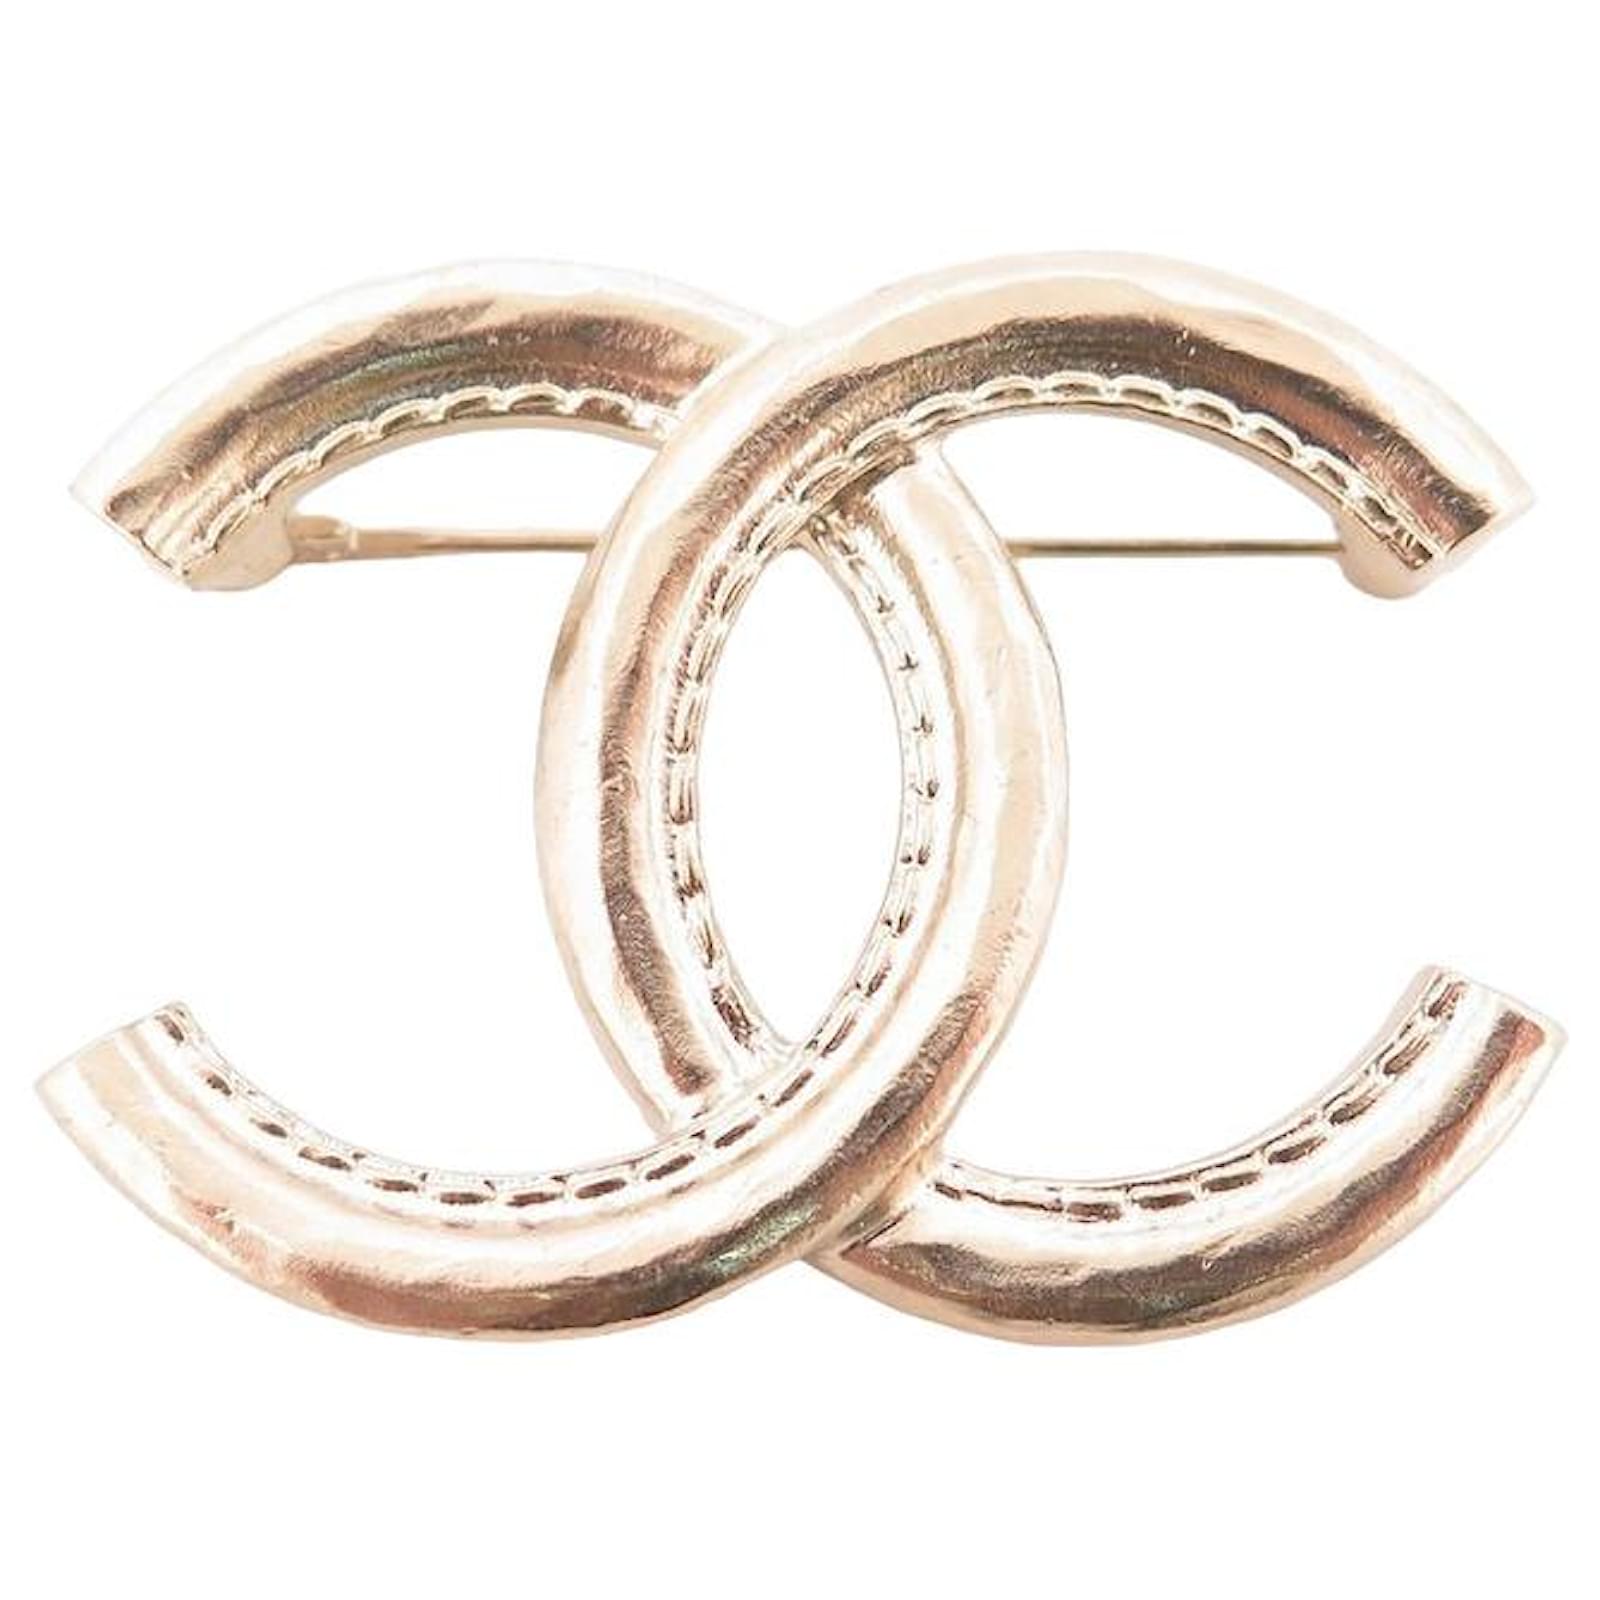 Other jewelry NEW CHANEL LOGO CC BROOCH IN GOLD METAL COLLECTION